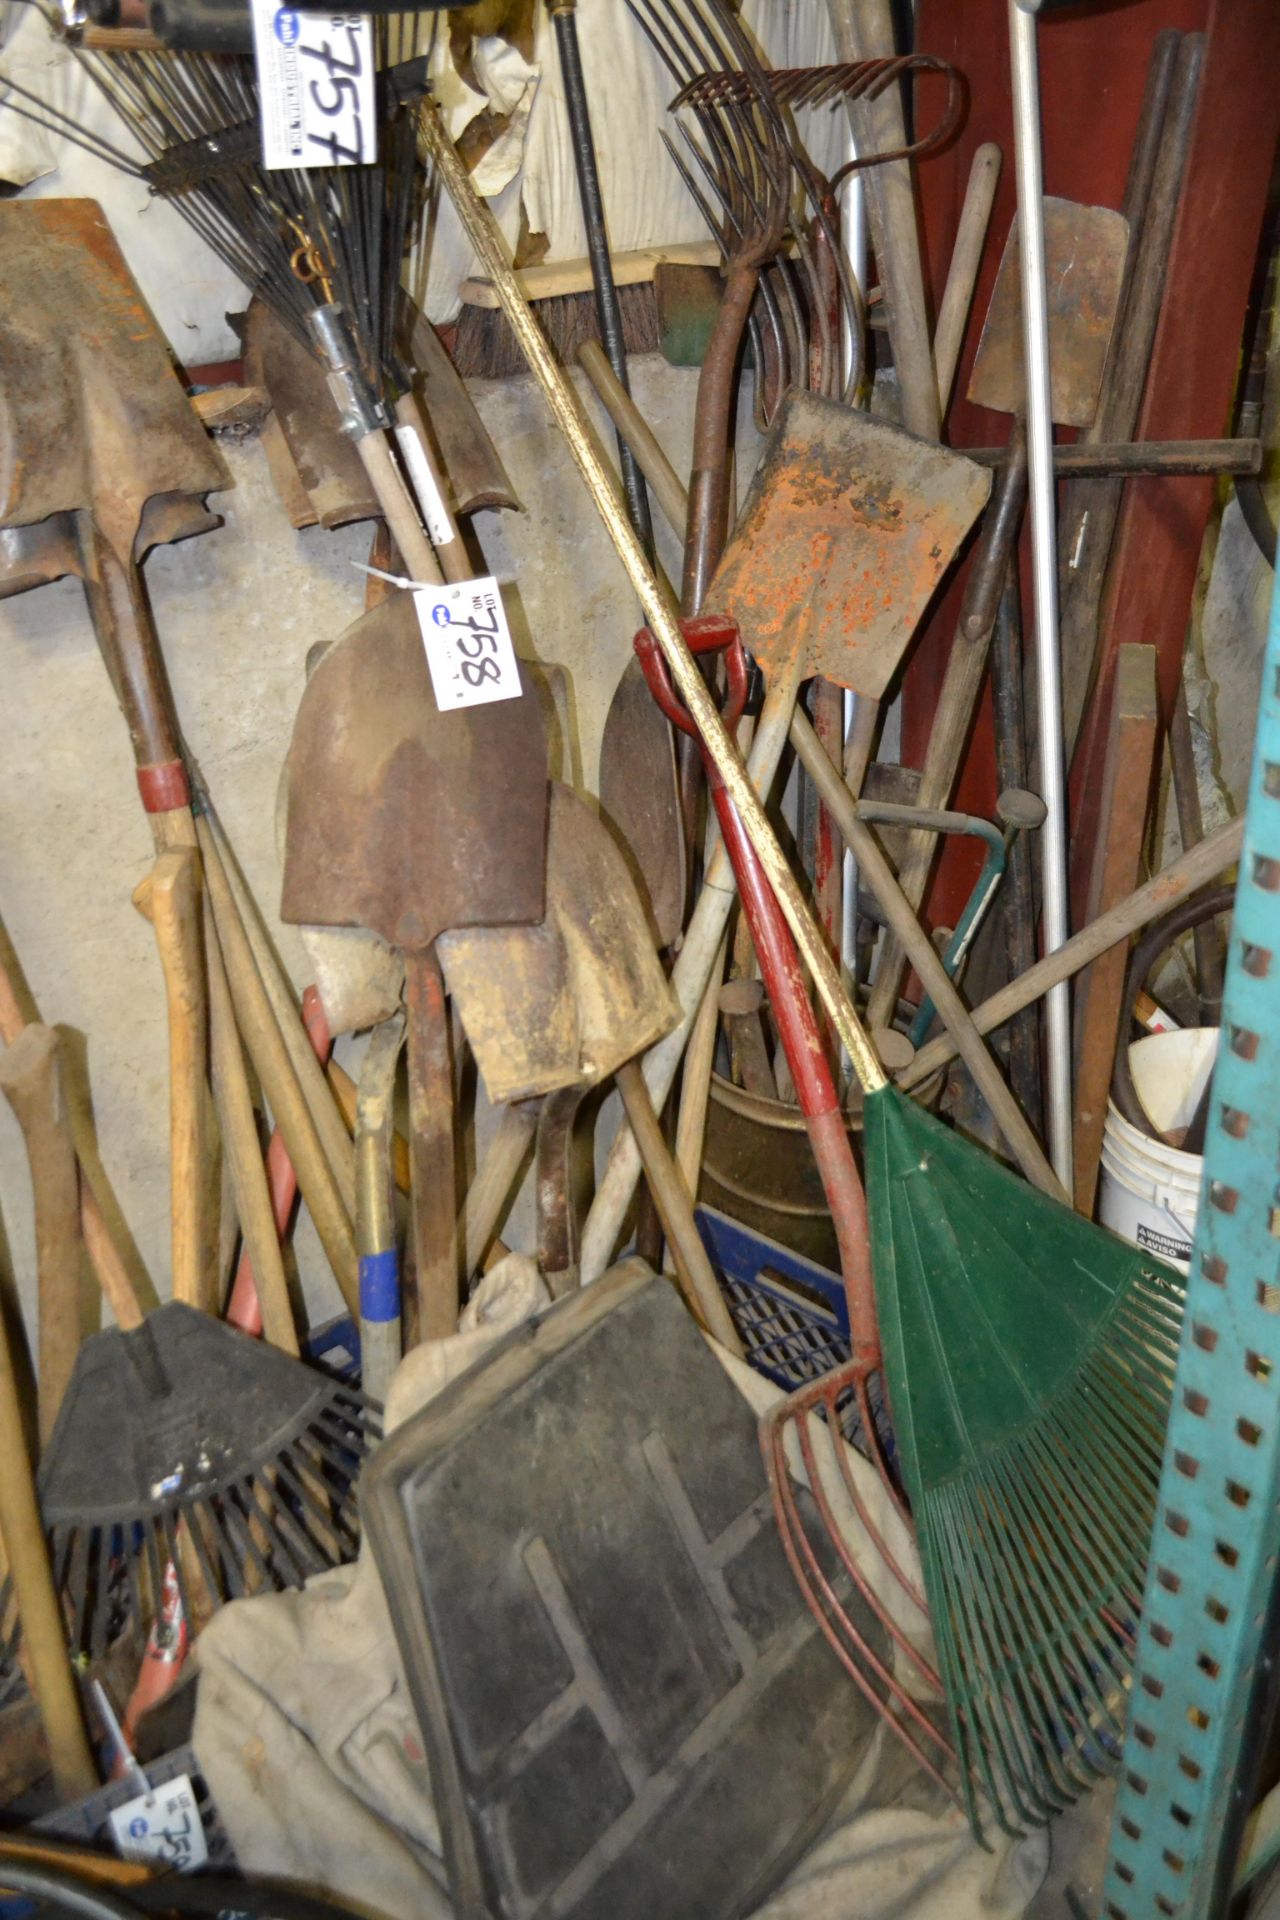 Assorted Flat and Round head shovels